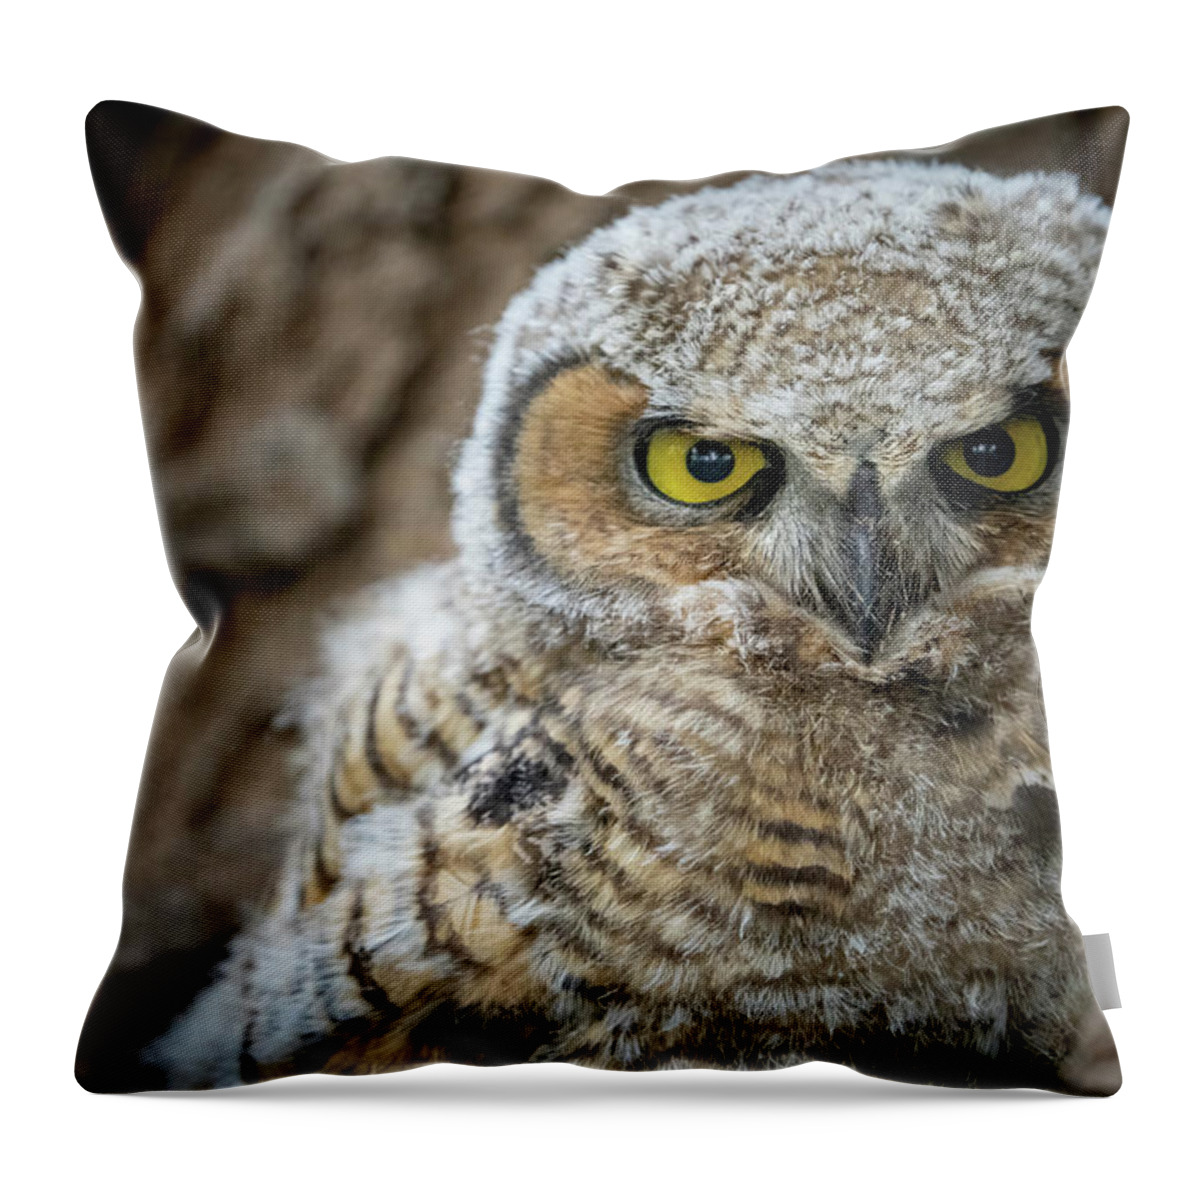 Owl Throw Pillow featuring the photograph Great Horned Owlet by Wesley Aston